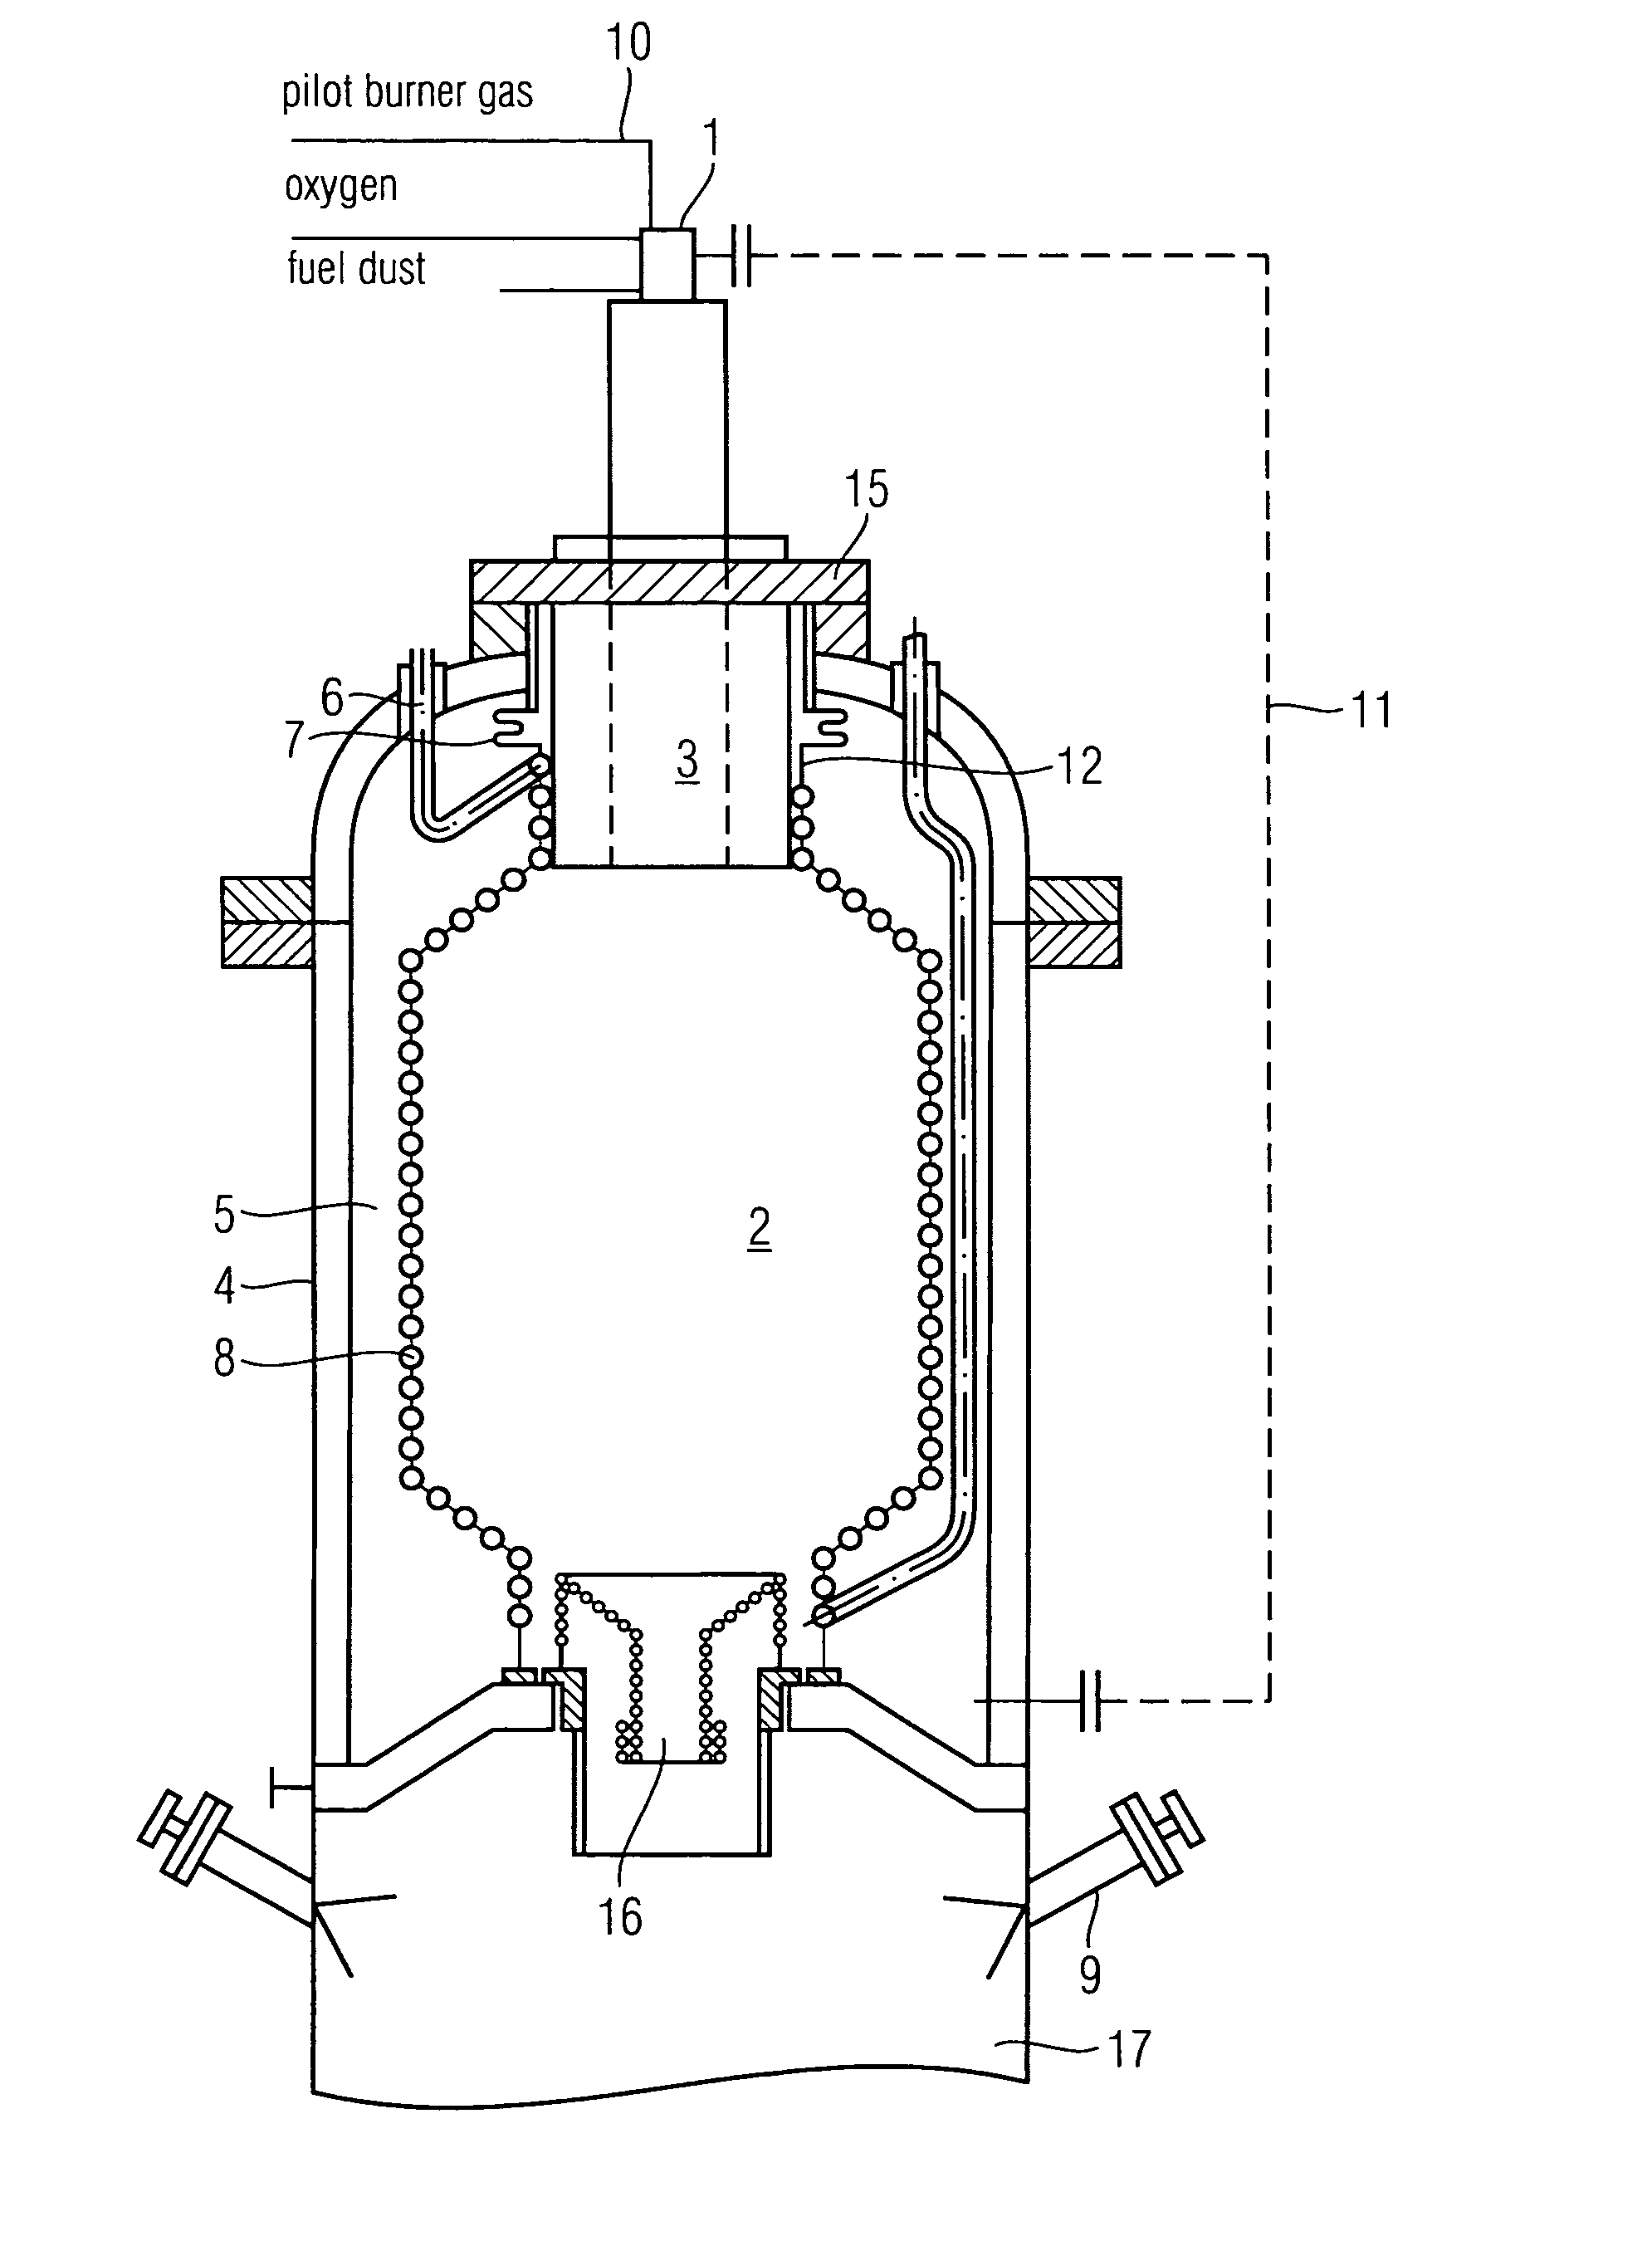 Entrained-flow gasifier with cooling screen and bellows compensator